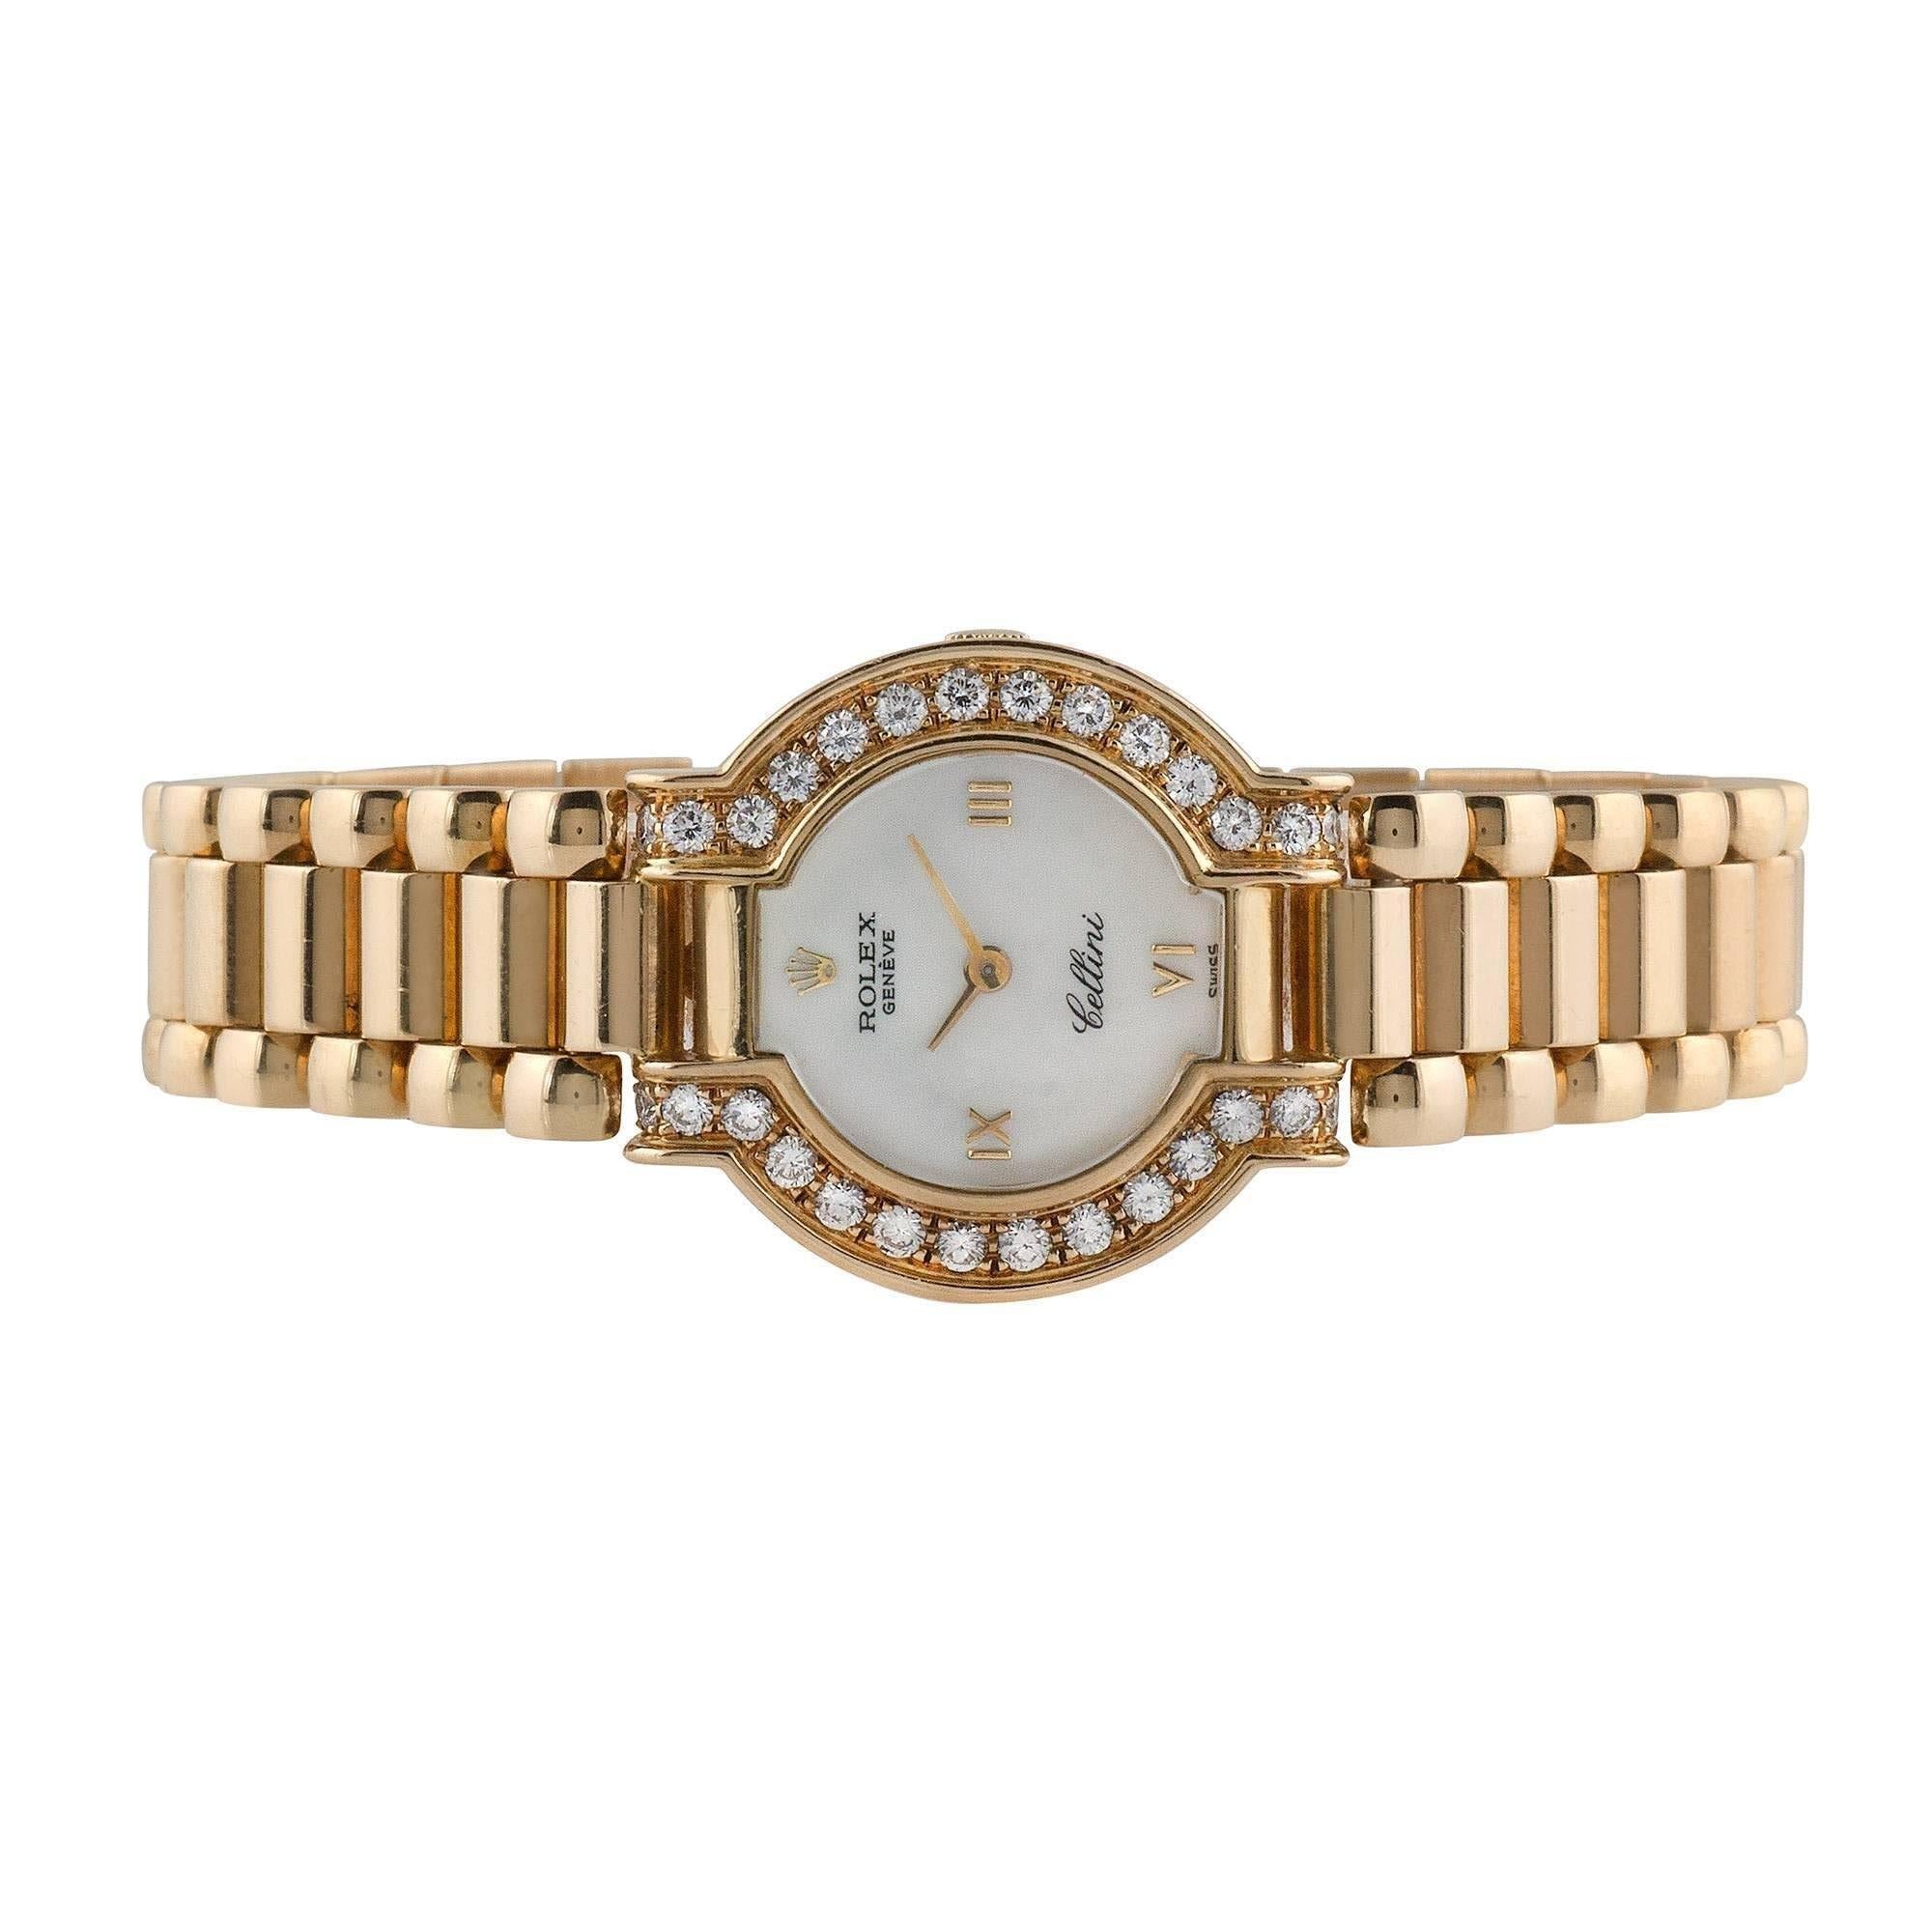 Rolex Cellini 18k yellow gold ladies wristwatch with factory diamonds, reference 2253, circa 1980. This exquisite Rolex features a Cellini 18 karat yellow gold case and bezel that is punctuated with factory diamonds, natural white mother-of-pearl